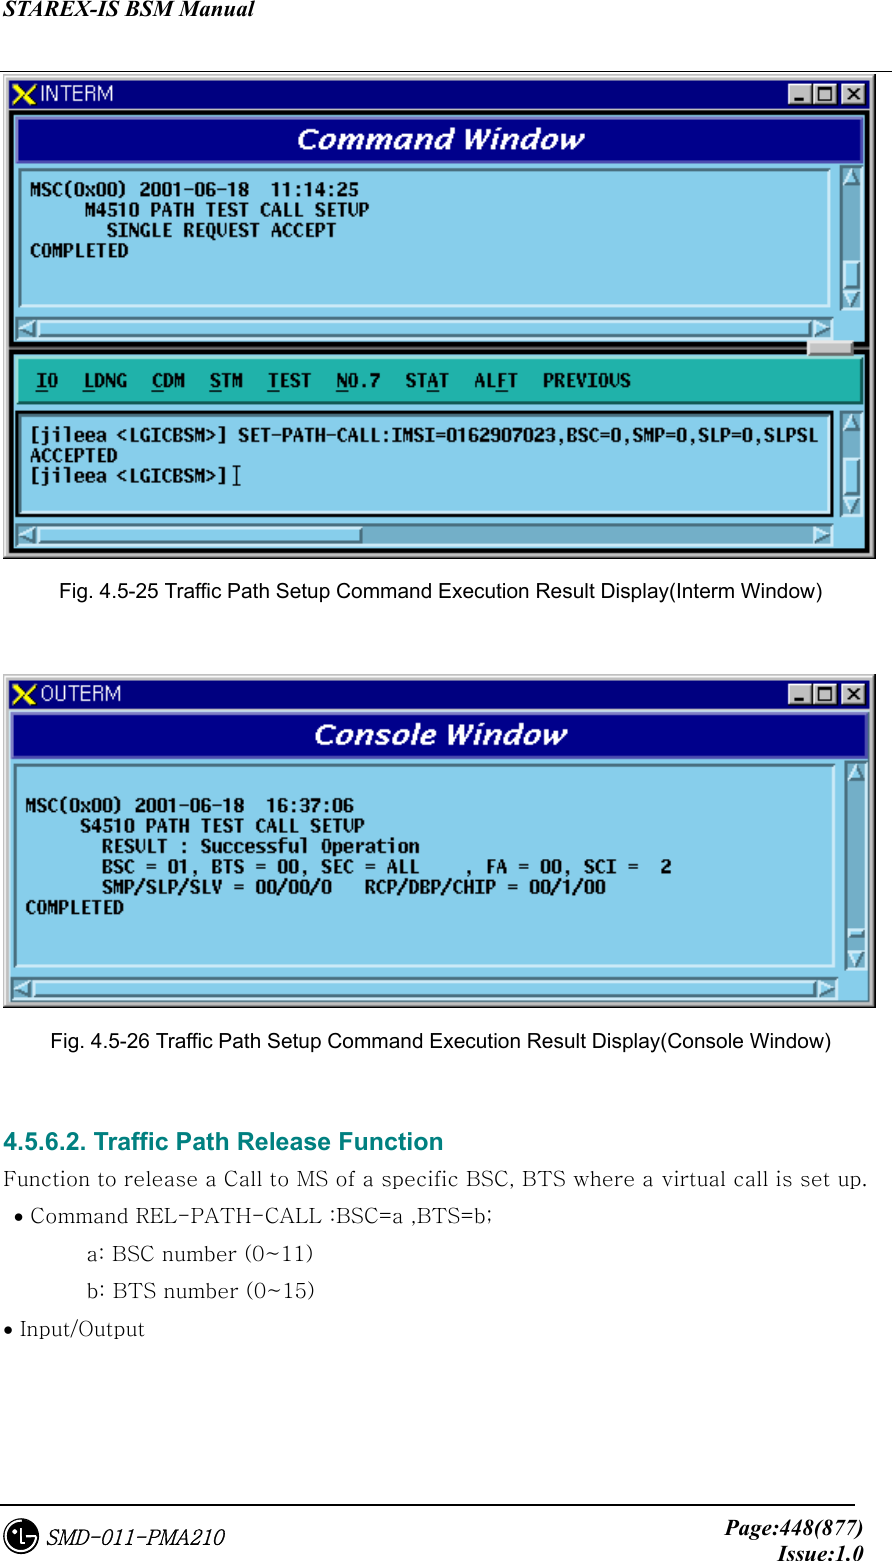 STAREX-IS BSM Manual     Page:448(877)Issue:1.0SMD-011-PMA210  Fig. 4.5-25 Traffic Path Setup Command Execution Result Display(Interm Window)   Fig. 4.5-26 Traffic Path Setup Command Execution Result Display(Console Window)  4.5.6.2. Traffic Path Release Function Function to release a Call to MS of a specific BSC, BTS where a virtual call is set up.    • Command REL-PATH-CALL :BSC=a ,BTS=b;   a: BSC number (0~11)   b: BTS number (0~15) • Input/Output 